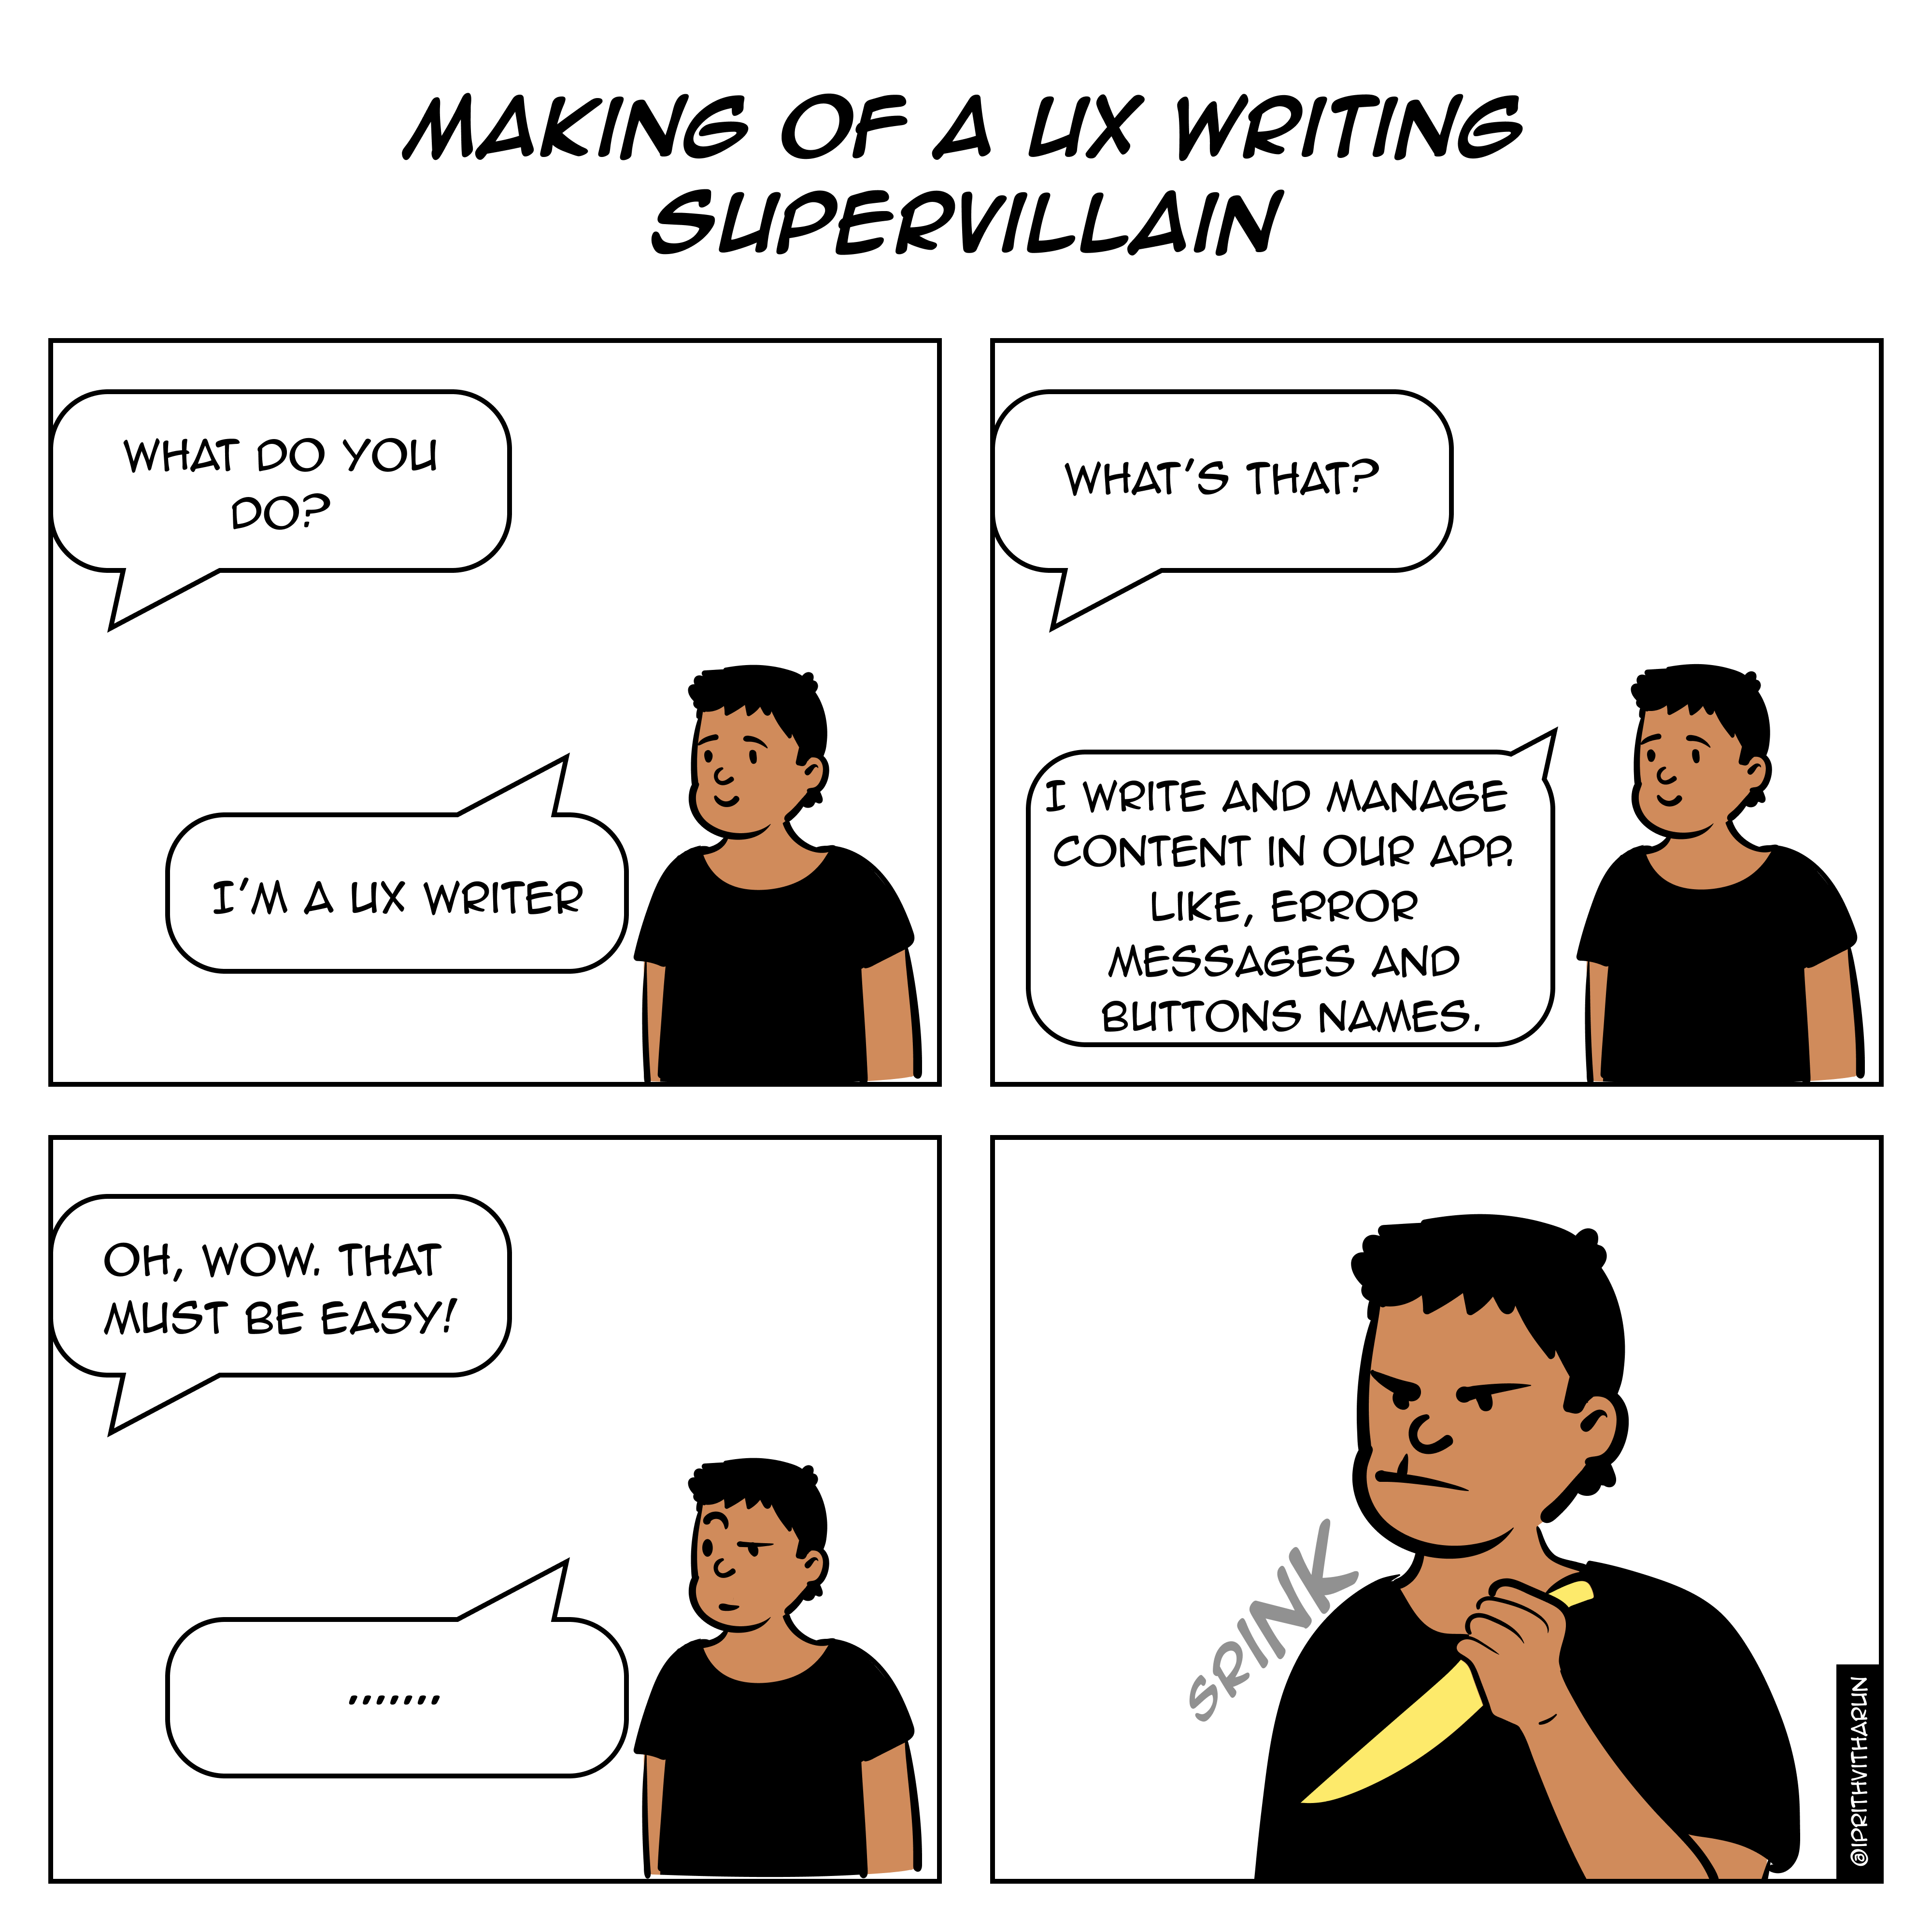 Making of a UX Writing Supervillain